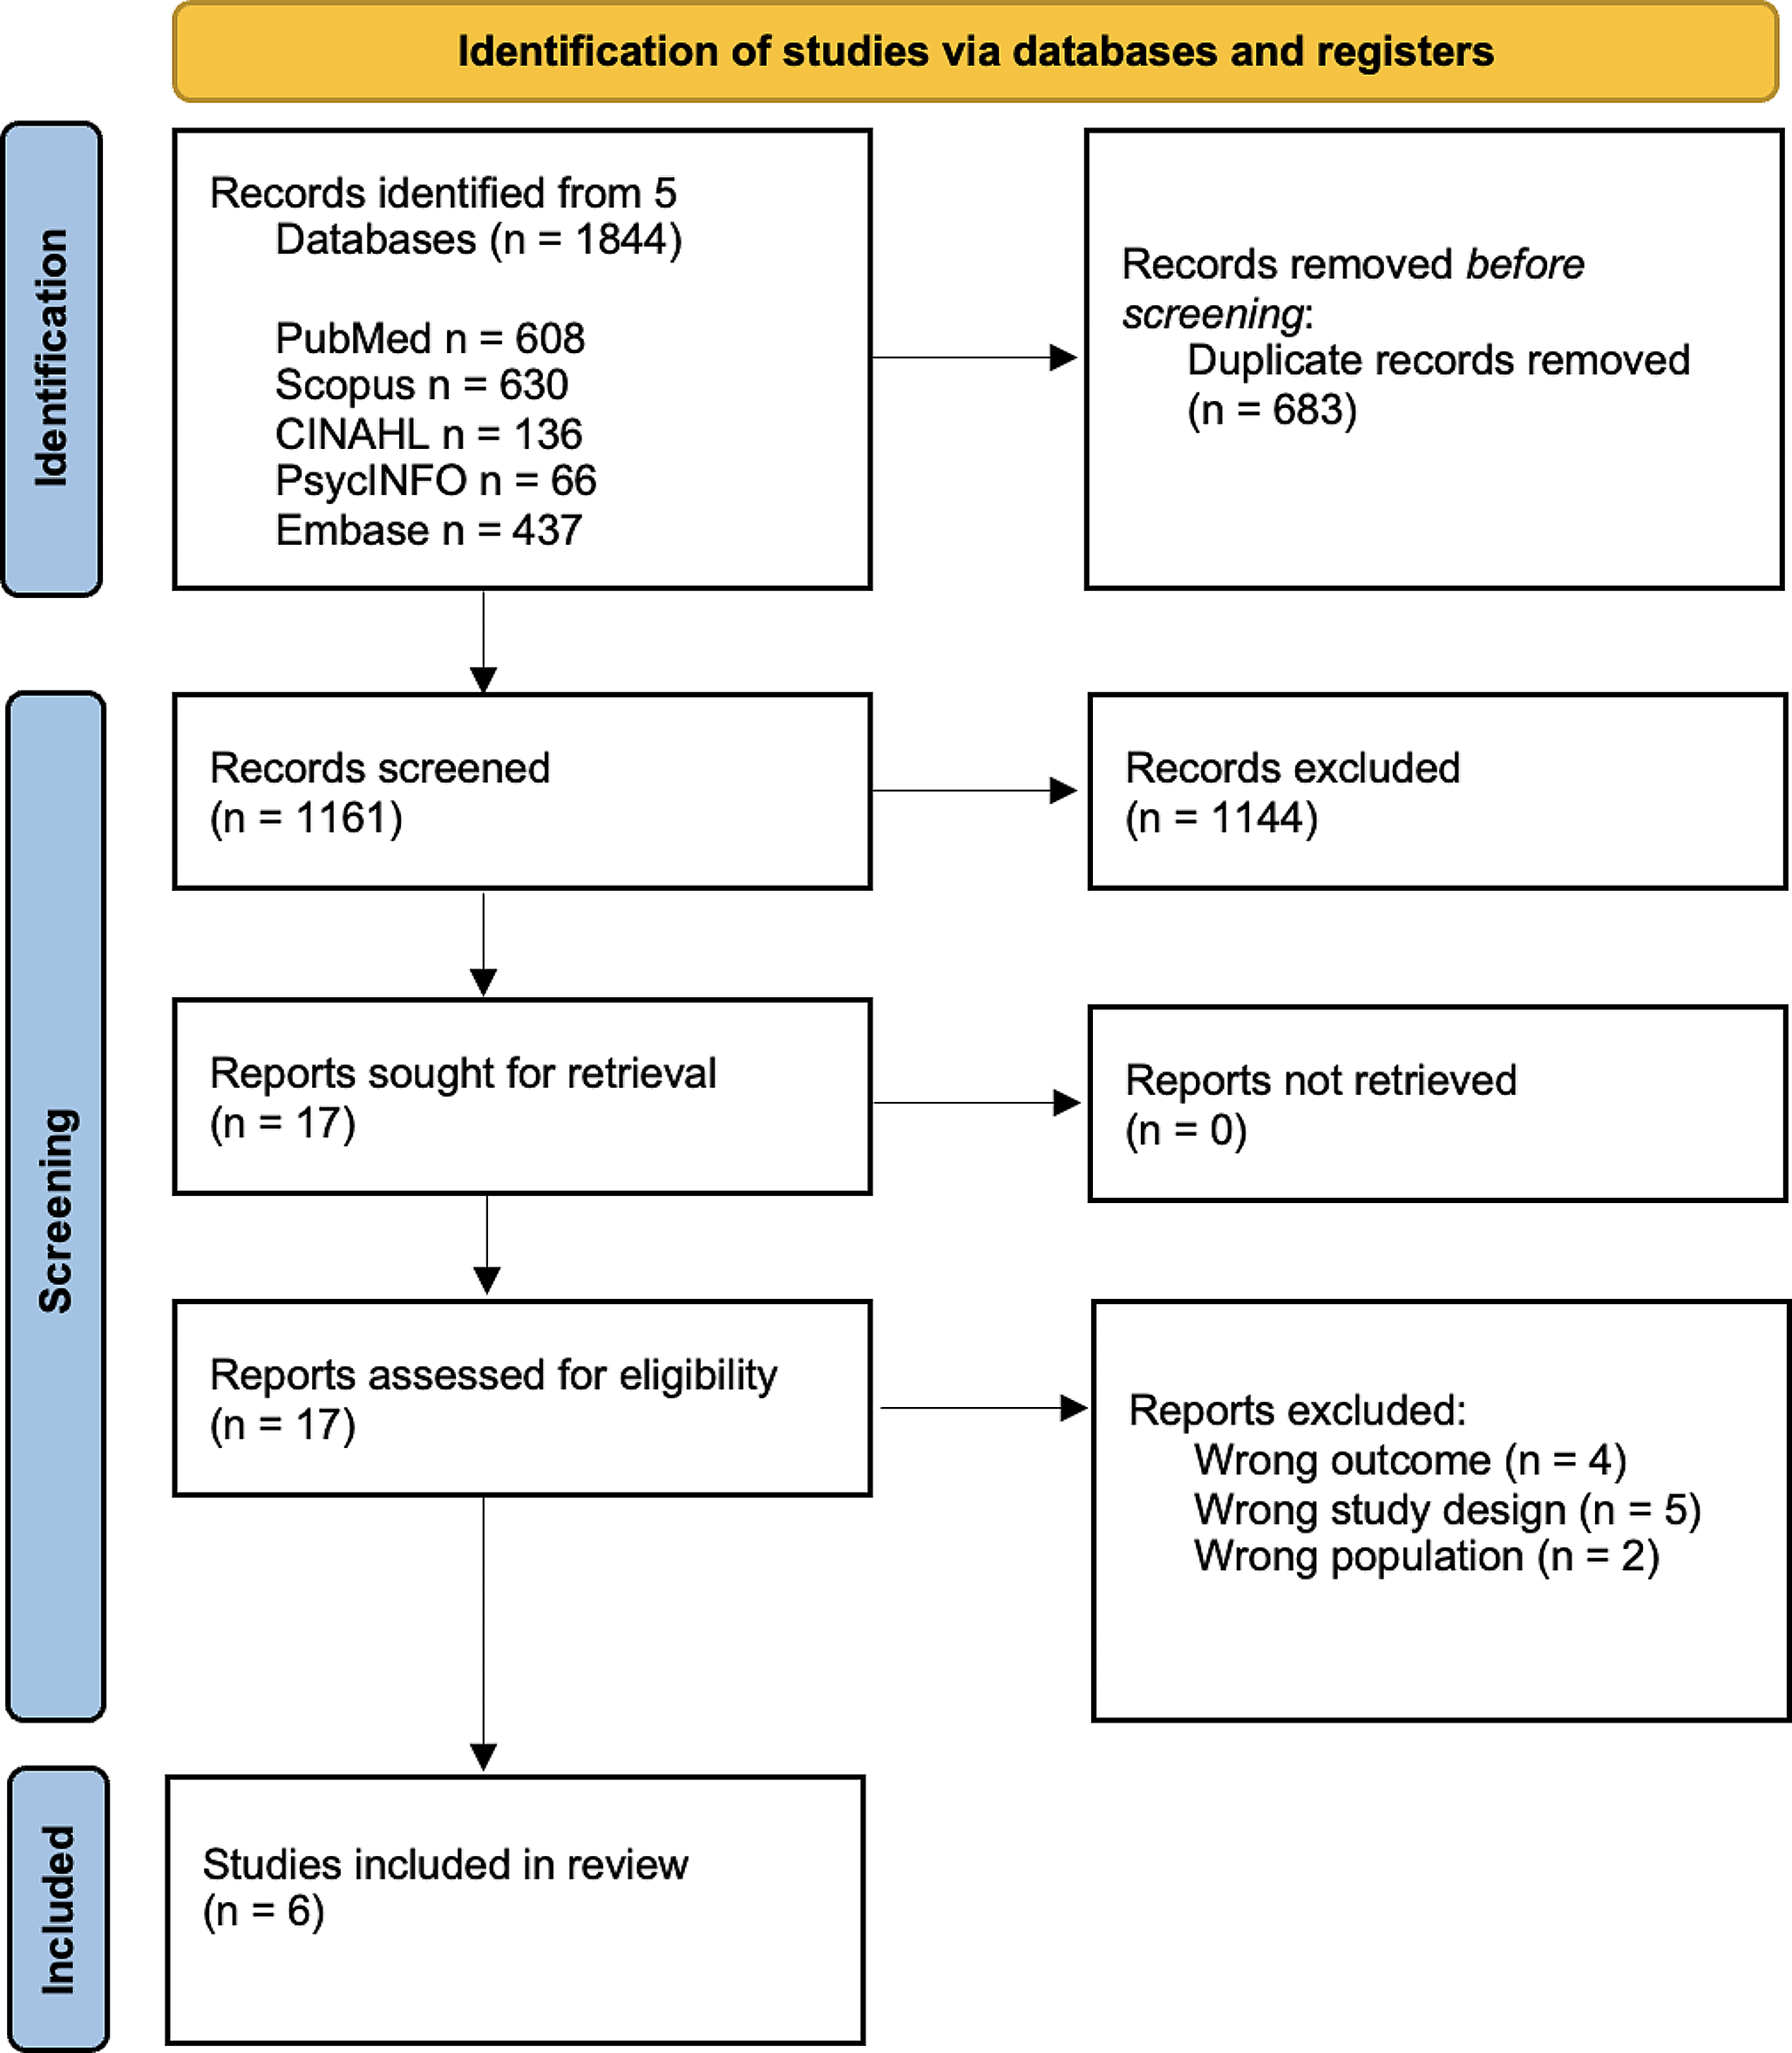 Effects of virtual reality on balance in people with diabetes: a systematic review and meta-analysis